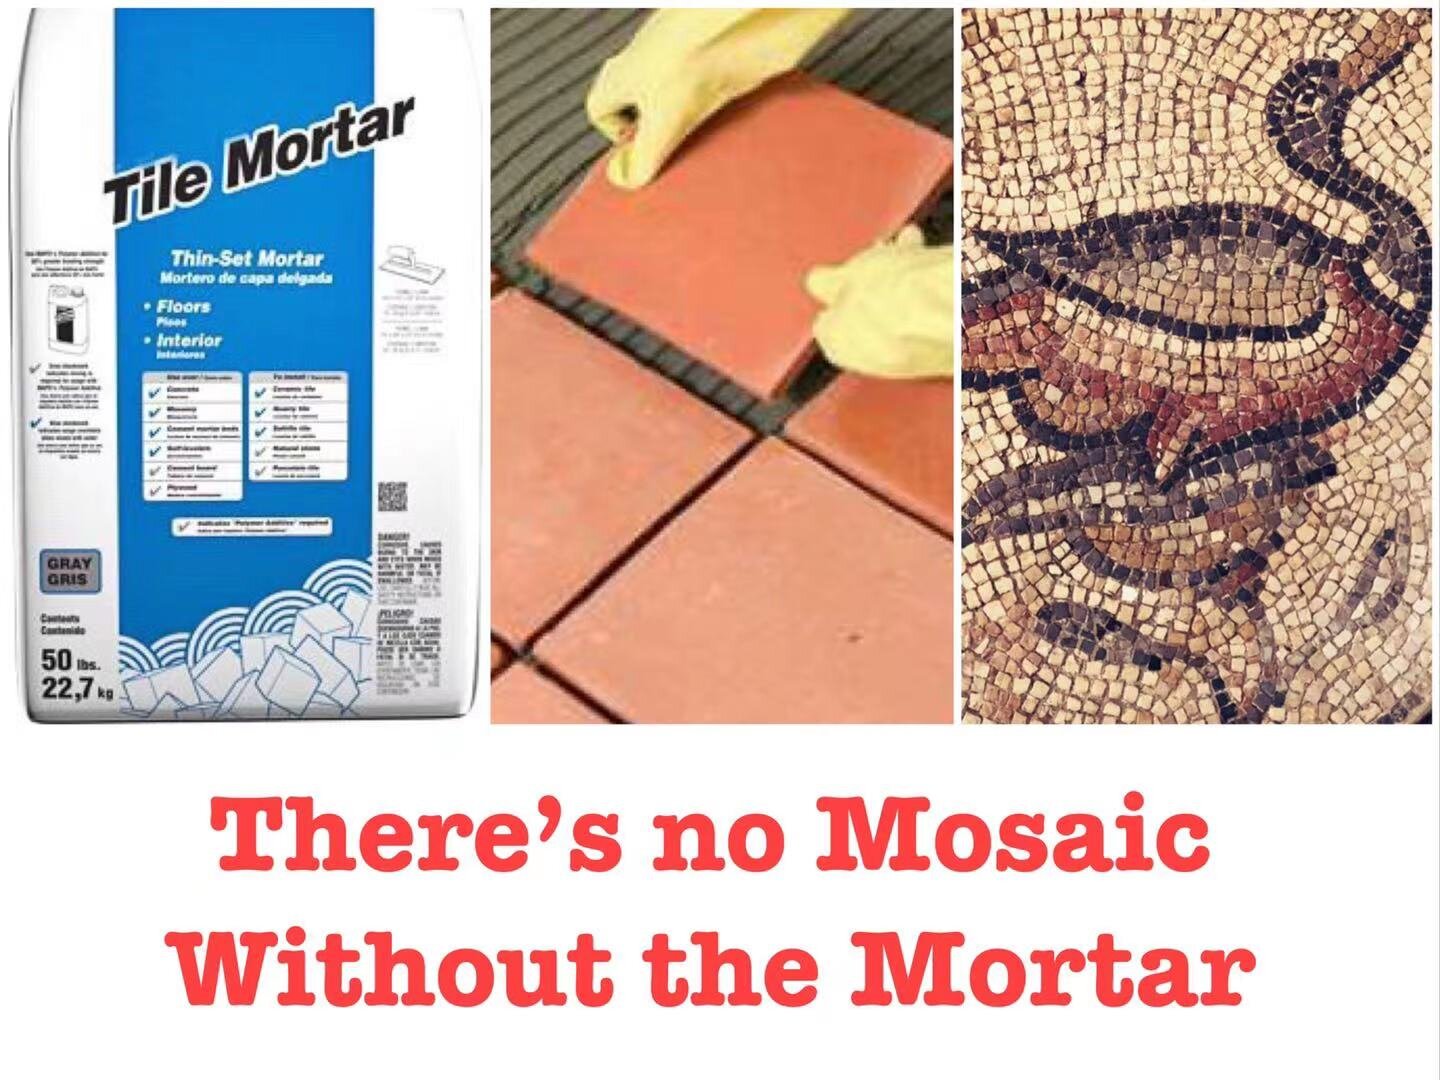 There's no Mosaic without the Mortar.